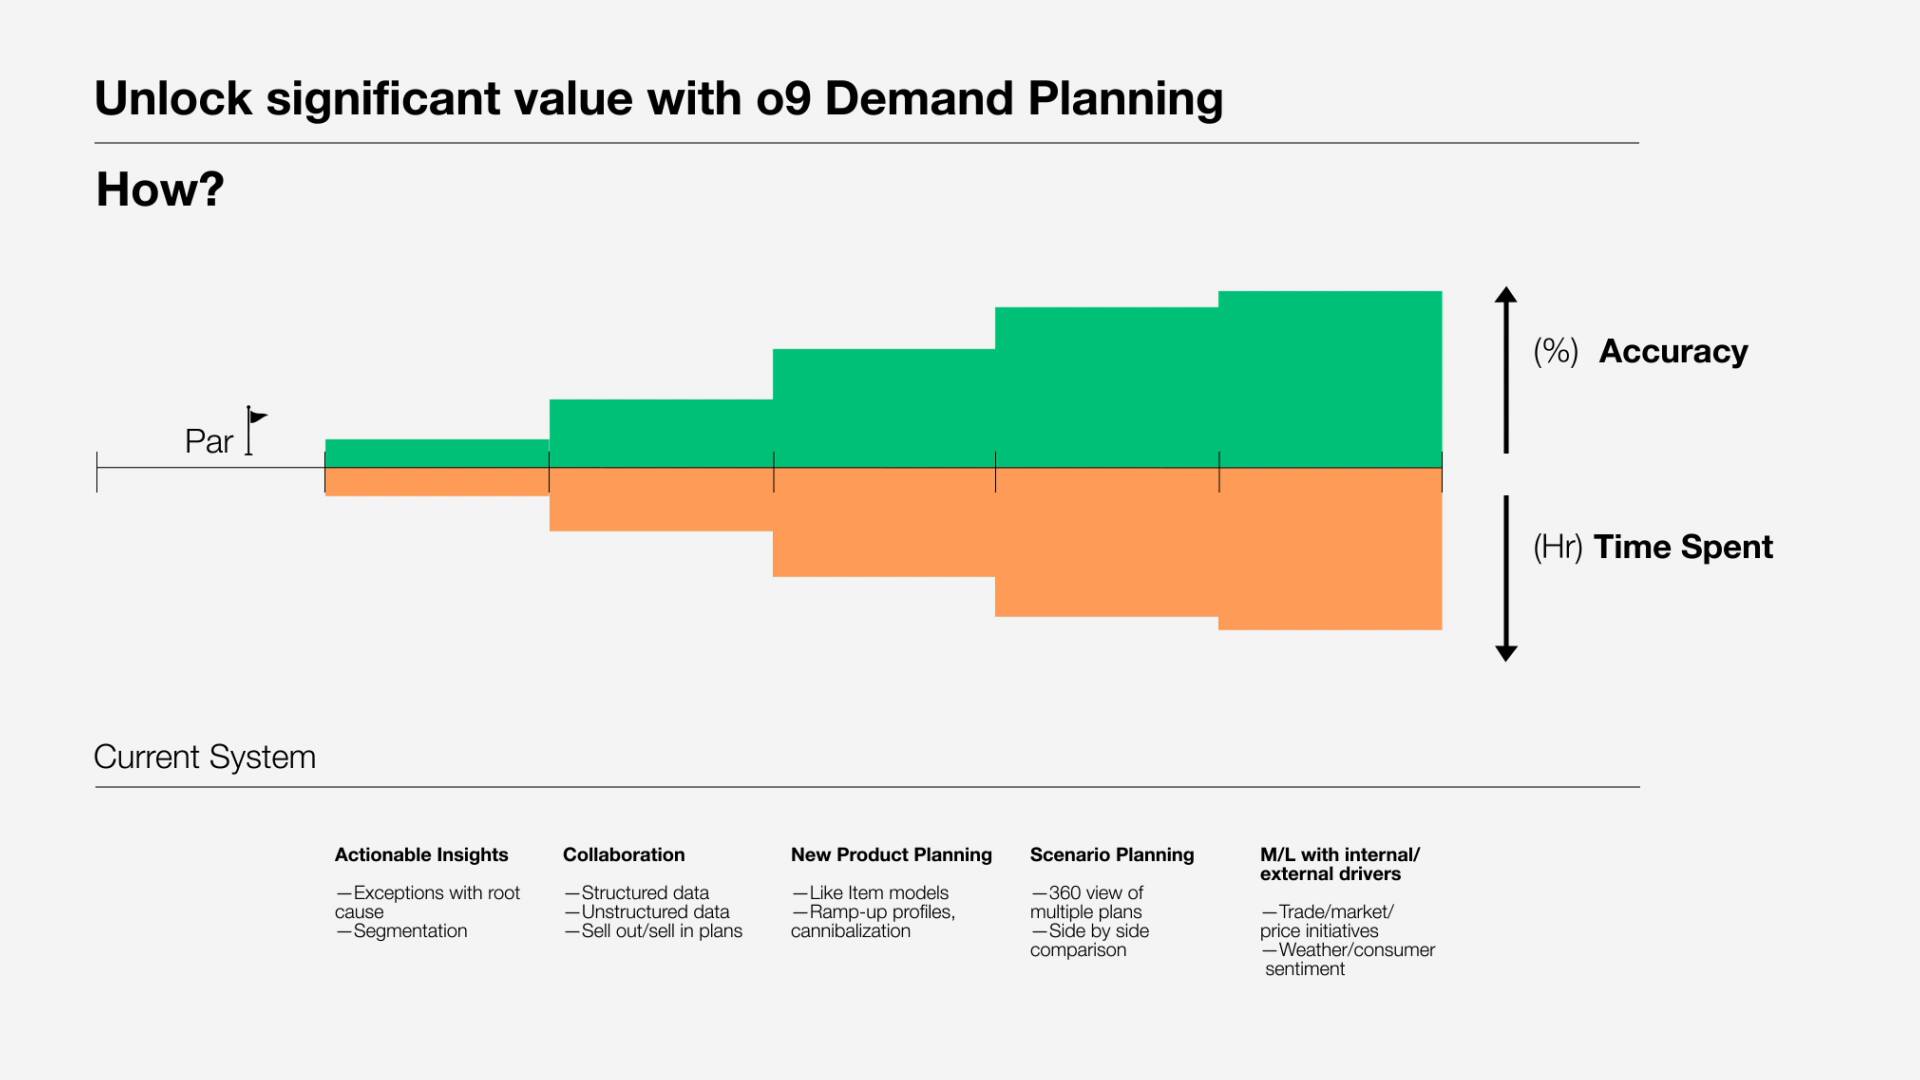 Examples of which o9 capabilities in demand planning drive value